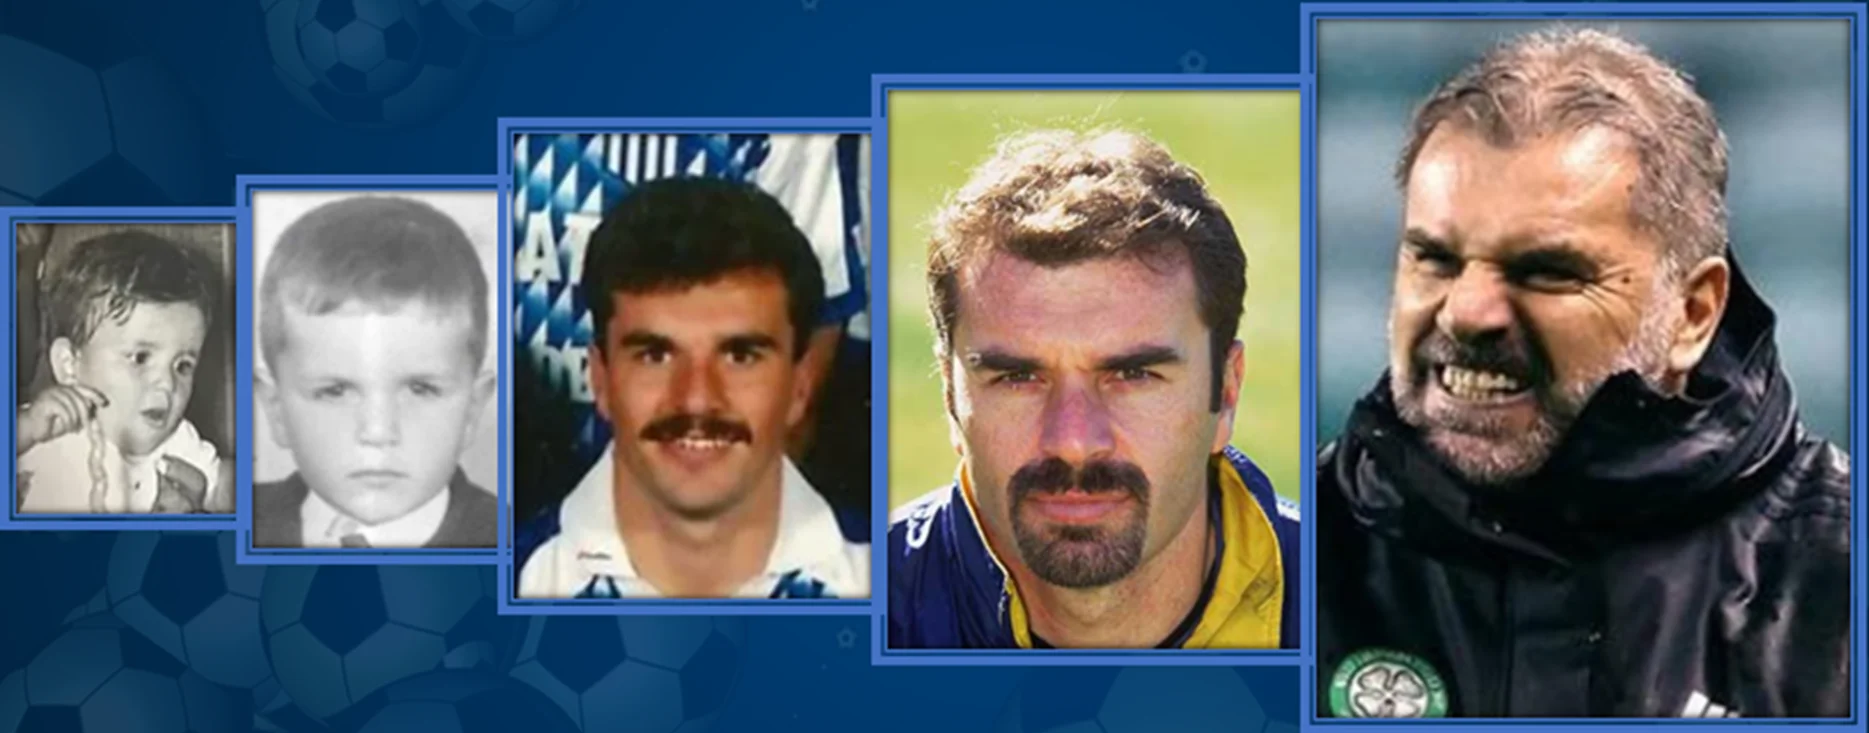 Ange Postecoglou Biography - From his childhood to the moment he emerged famous.